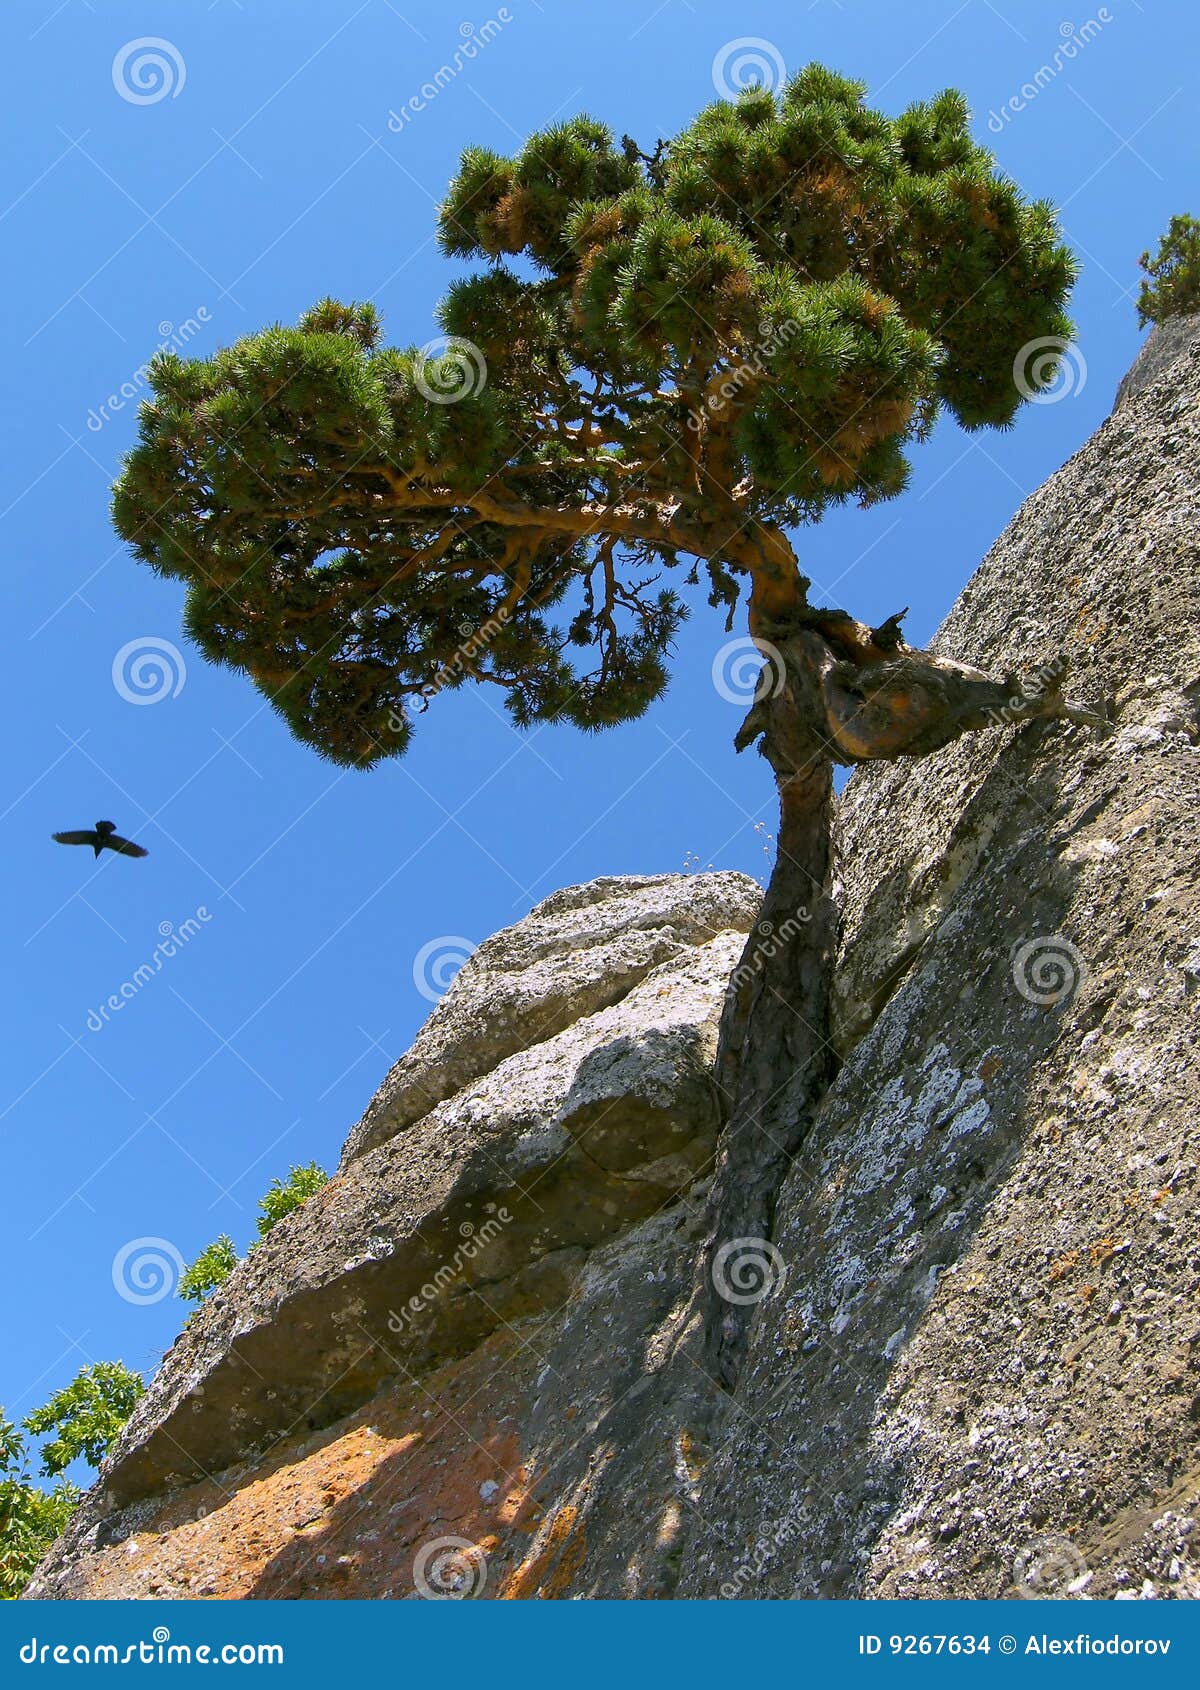 Pine Tree On Rock Face Stock Images - Image: 9267634